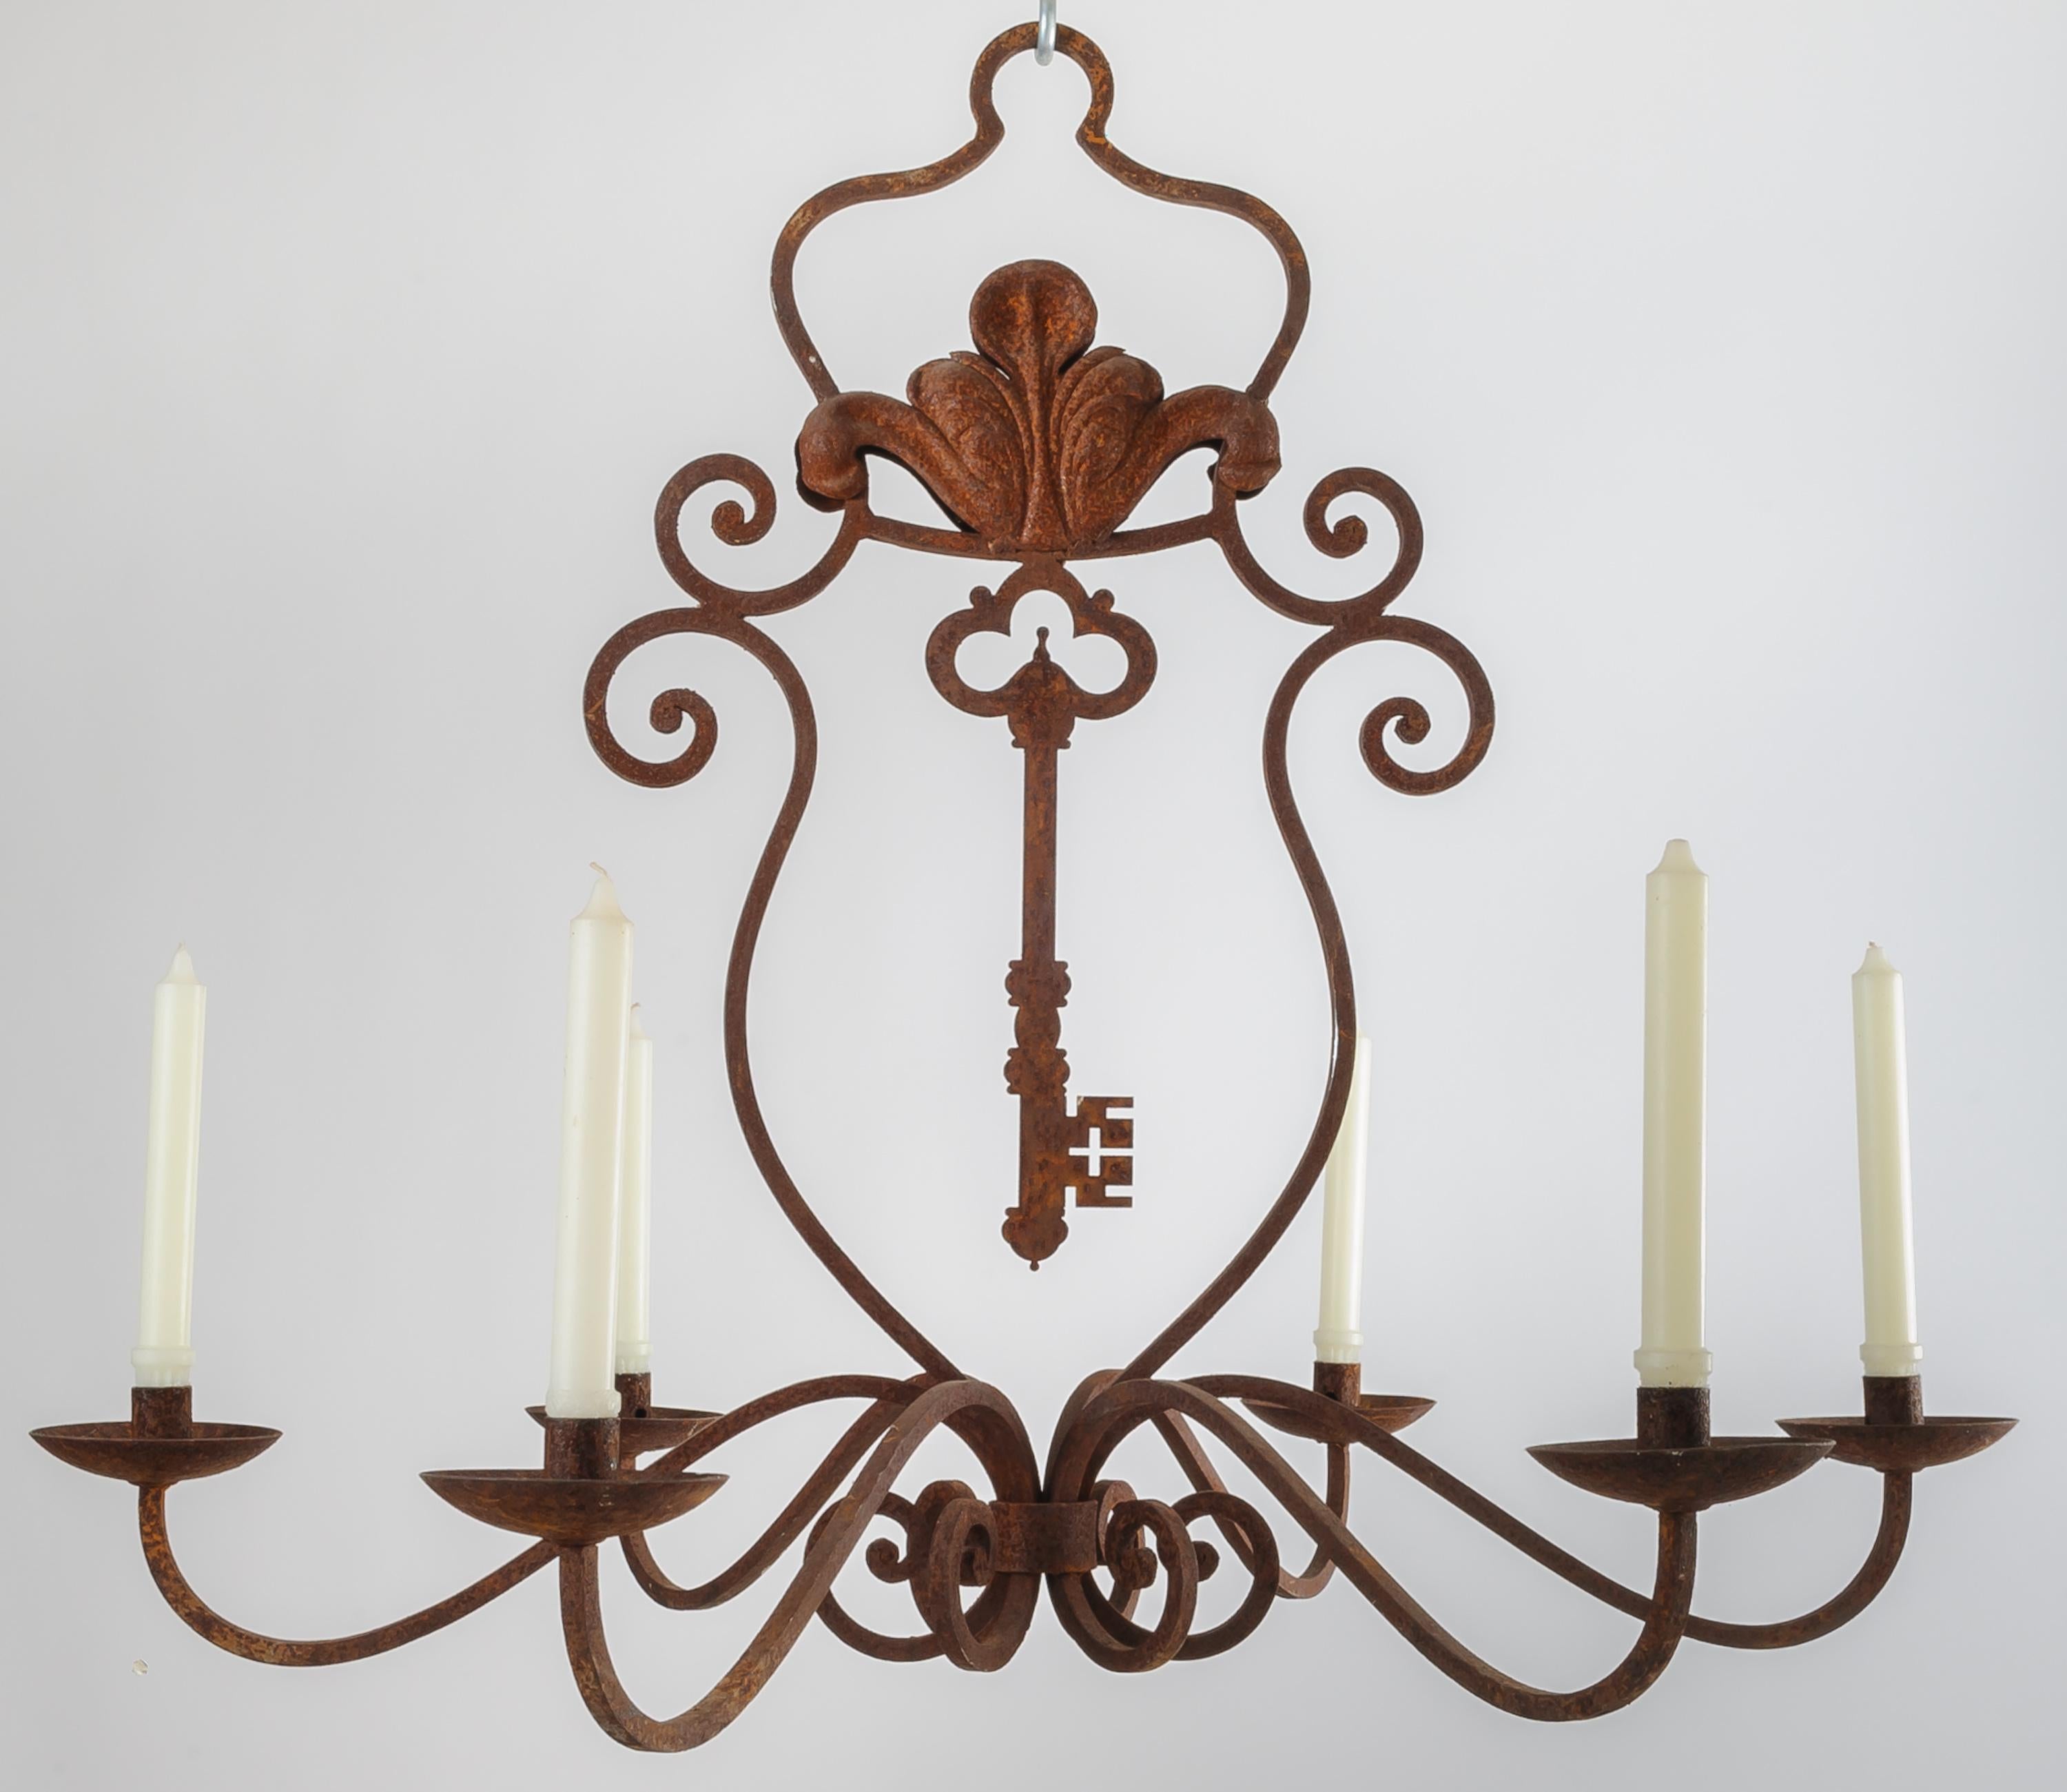 Rusted Iron French Chandelier with Key Motif In Good Condition For Sale In Carmel, CA